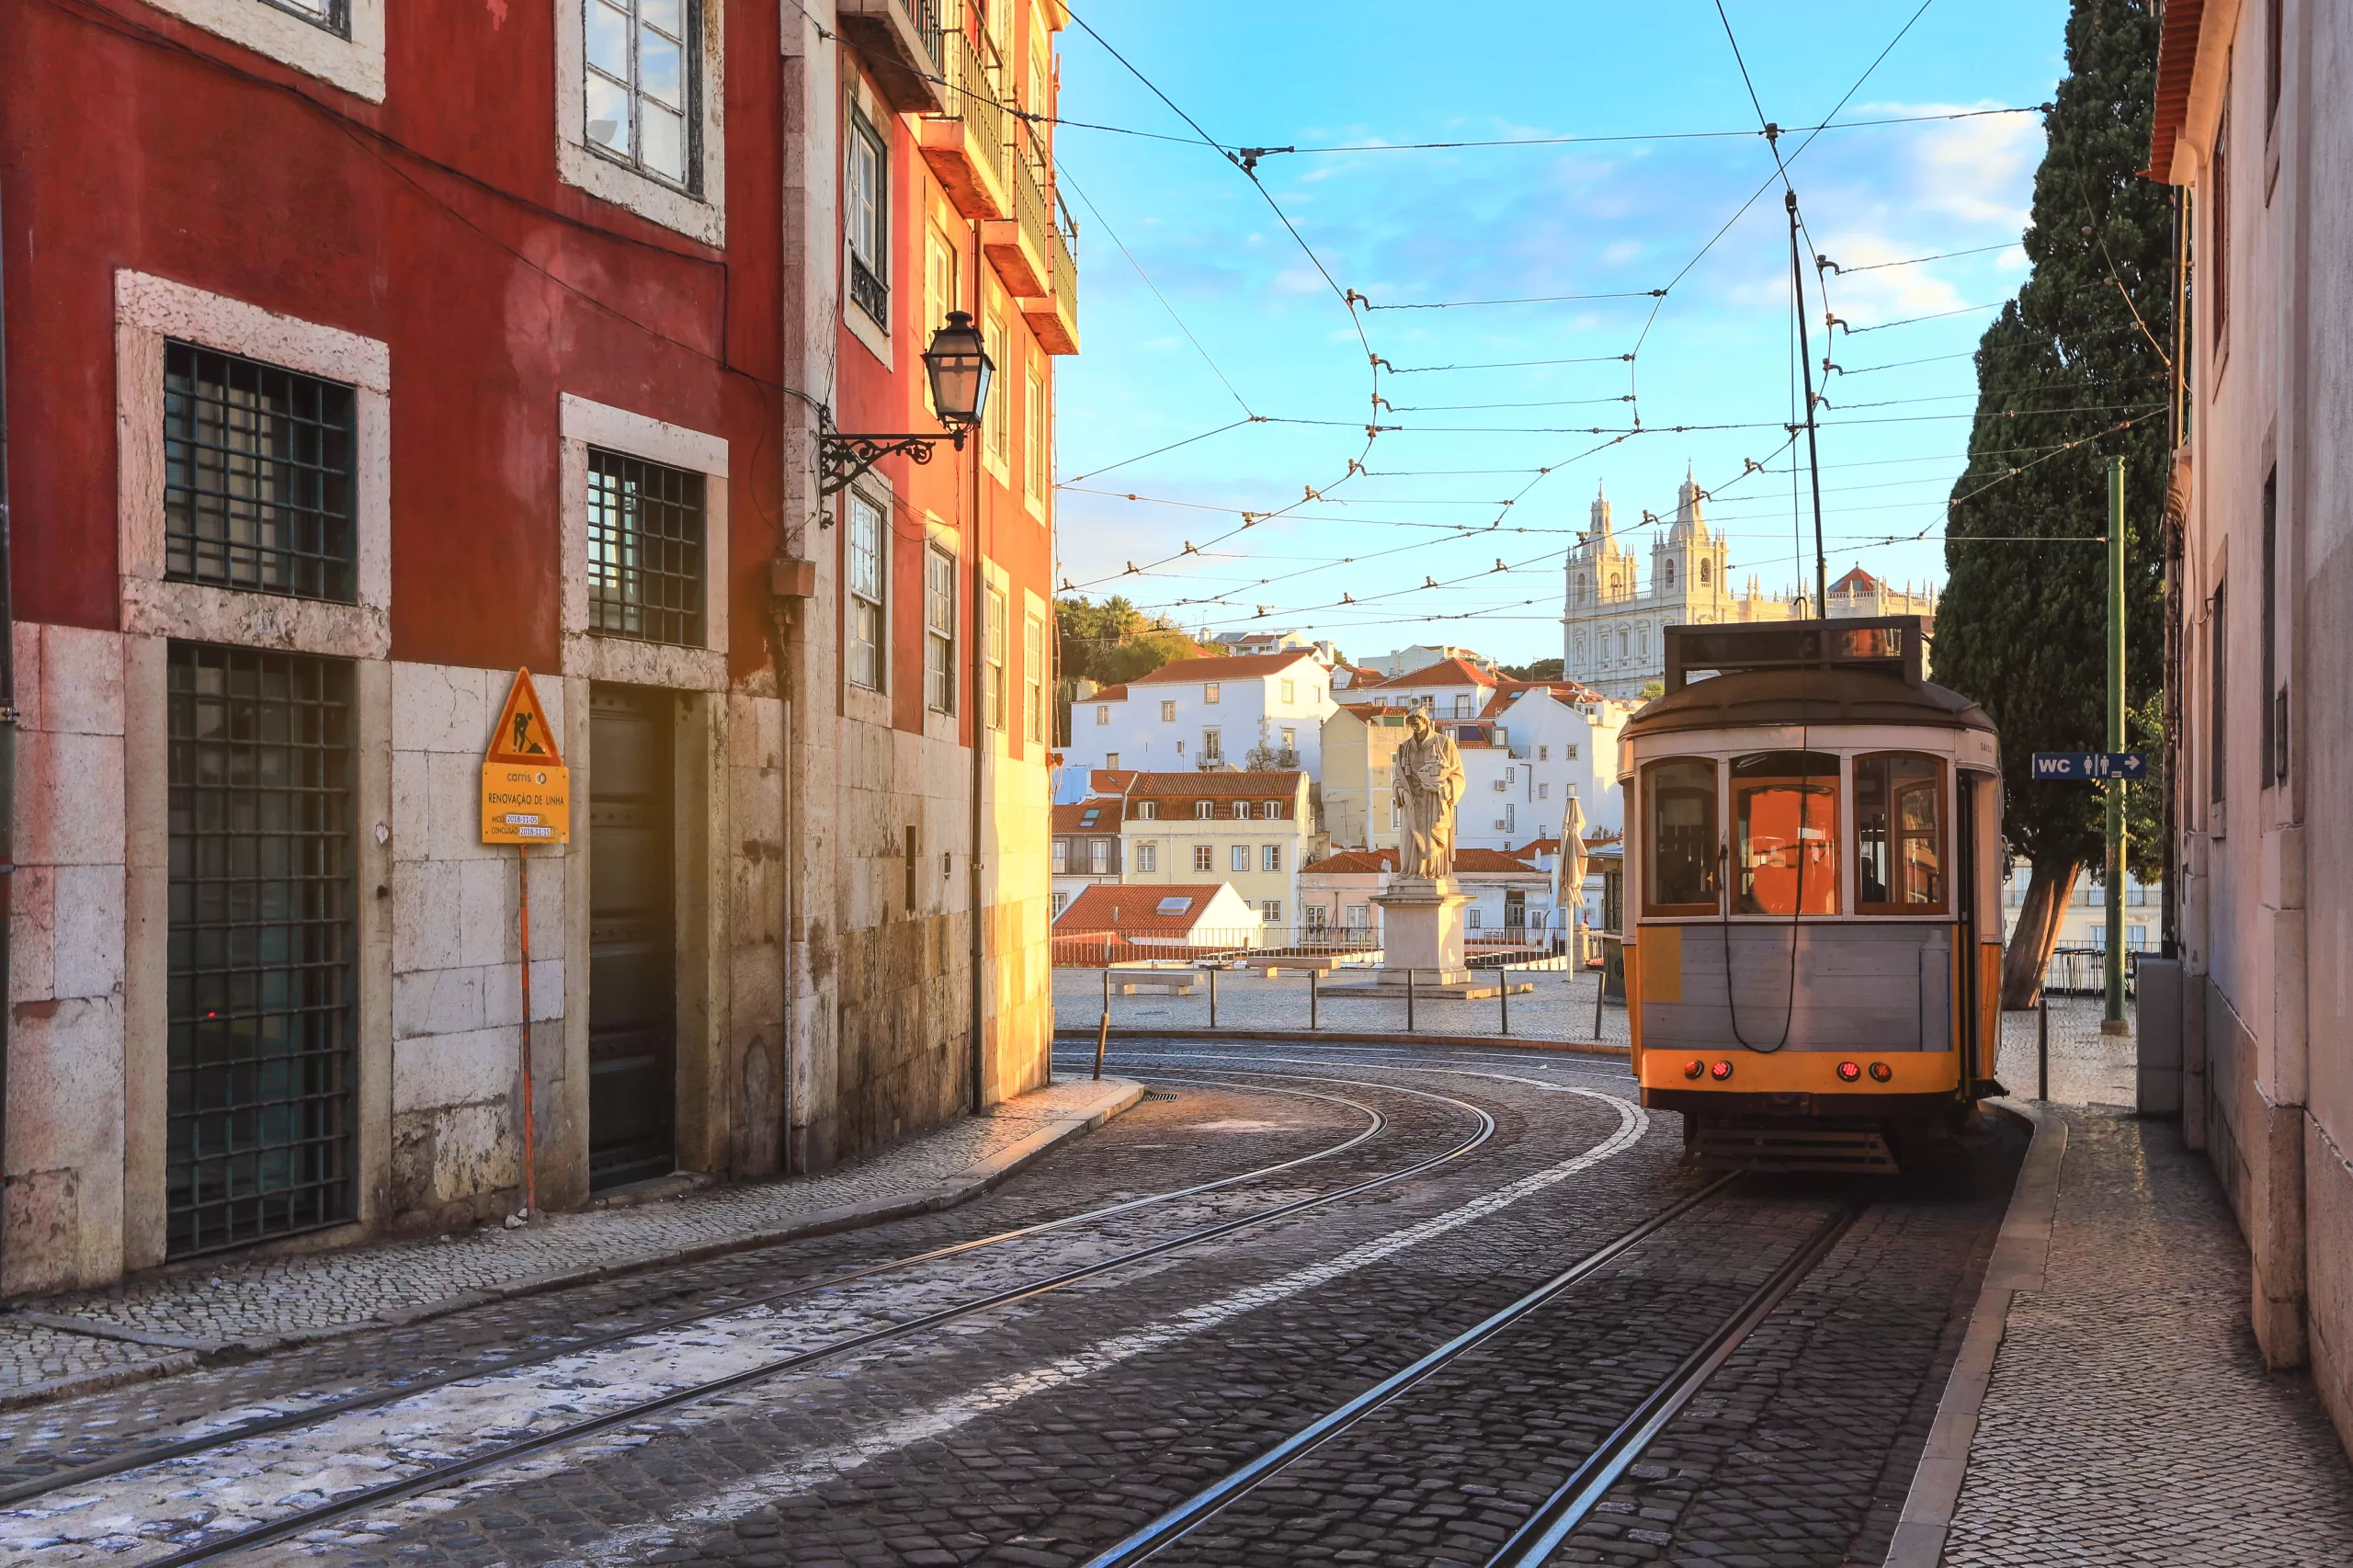 an-old-traditional-tram-carriage-in-the-city-centre-of-lisbon-portugal